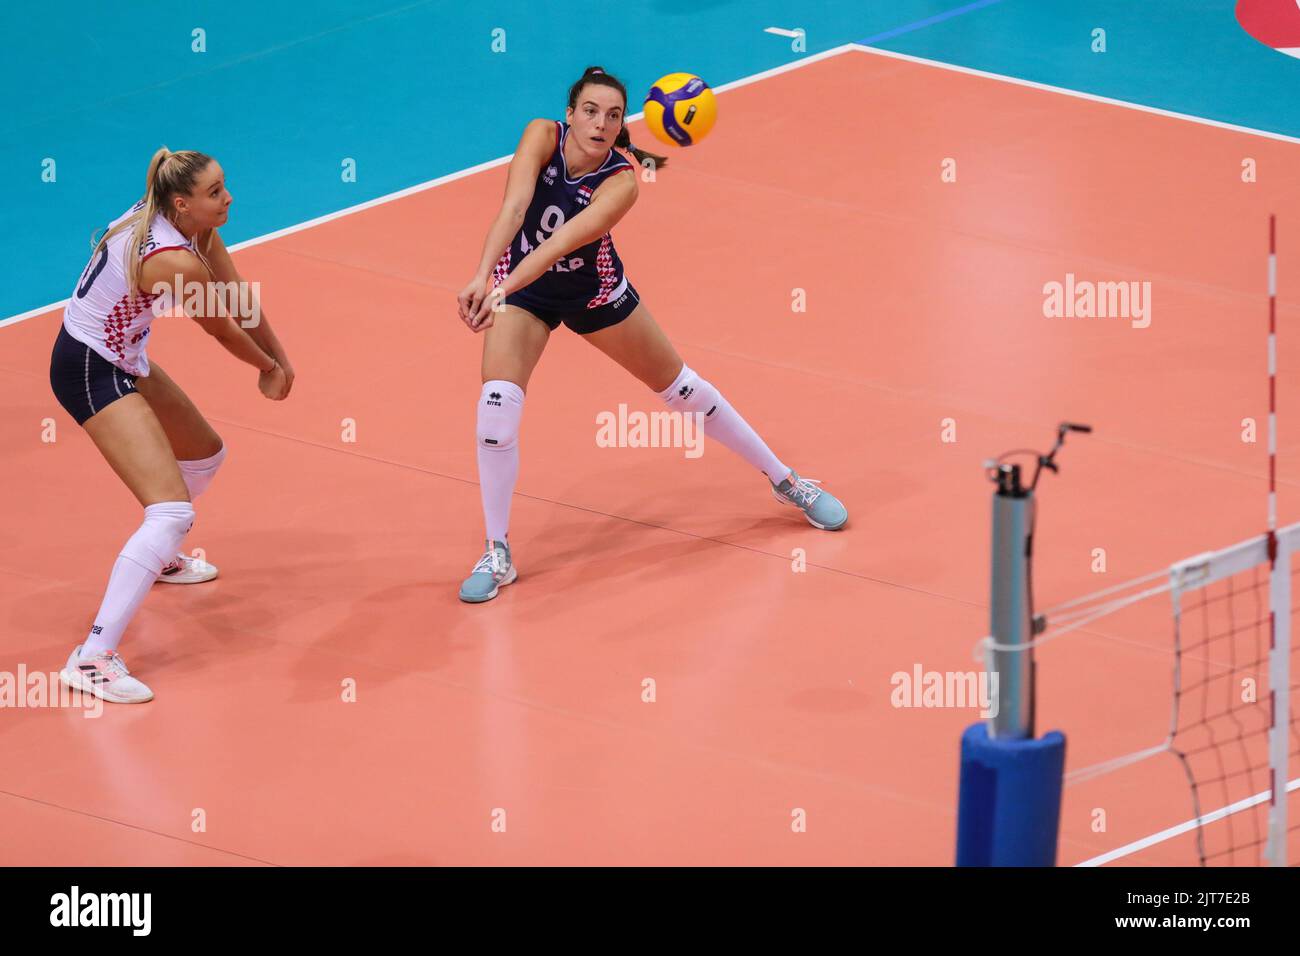 Dijana Karatovic and Lucija Mlinar of Croatia in action during European Volleyball Womens Championship Qualification Group A match between Croatia and Romania at Gradski Vrt indoor Arena on August 28, 2022 in